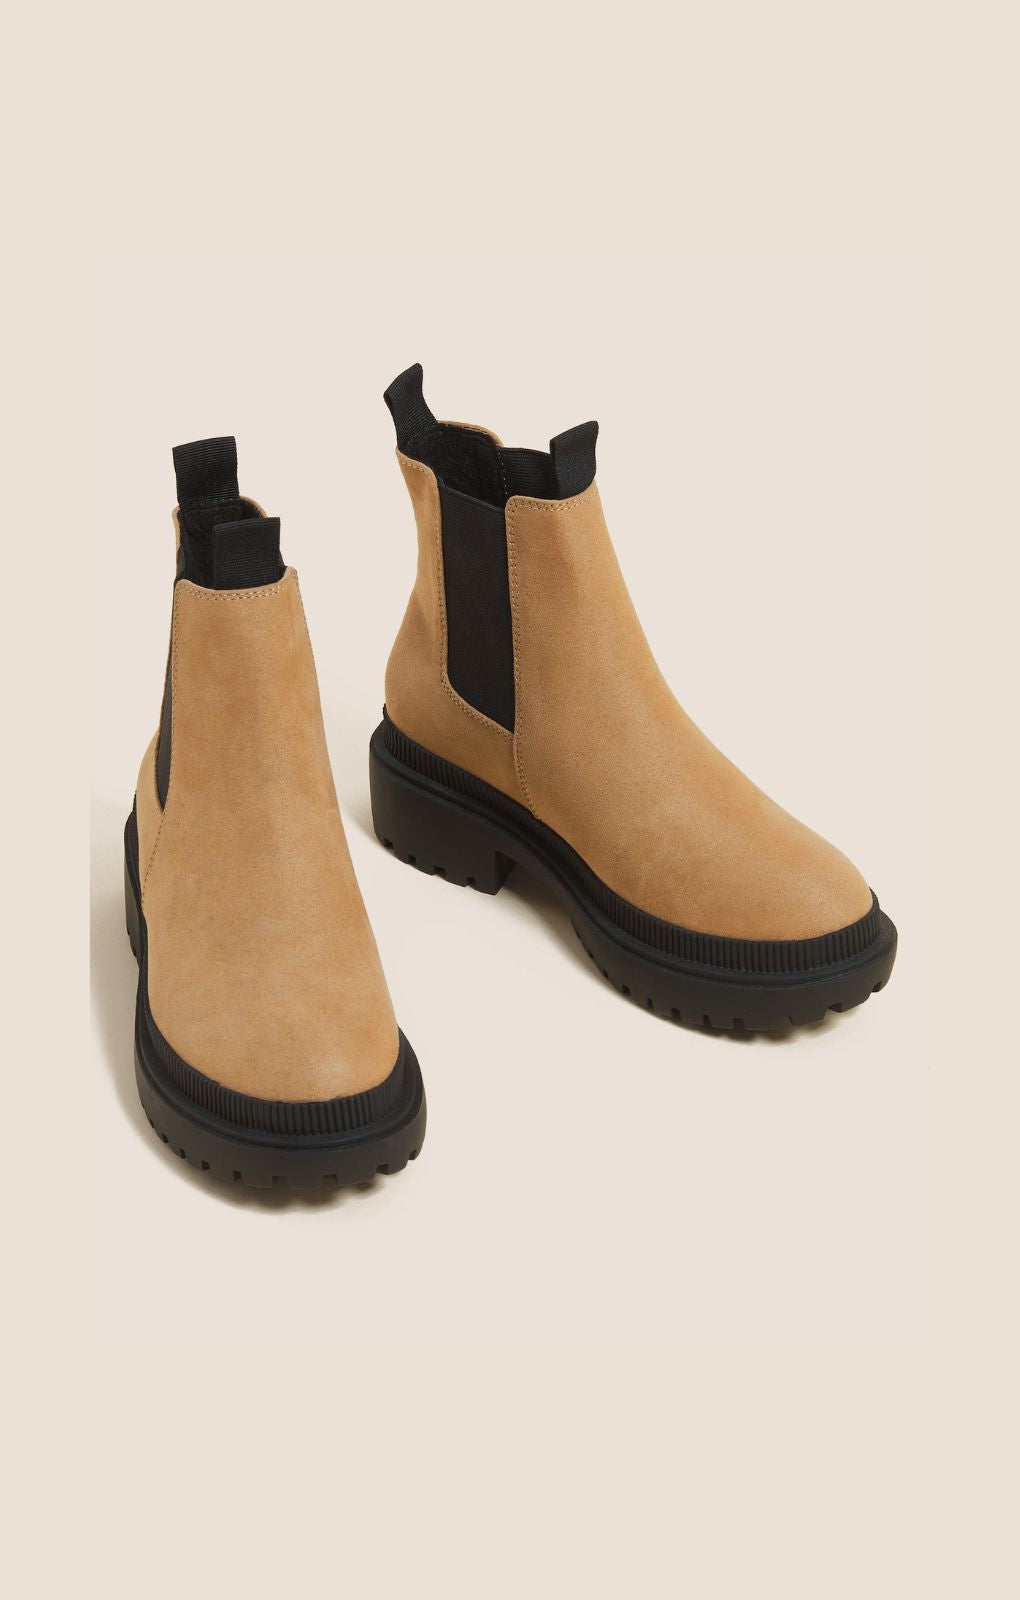 M&S Sand The Chunky Chelsea Boots product image